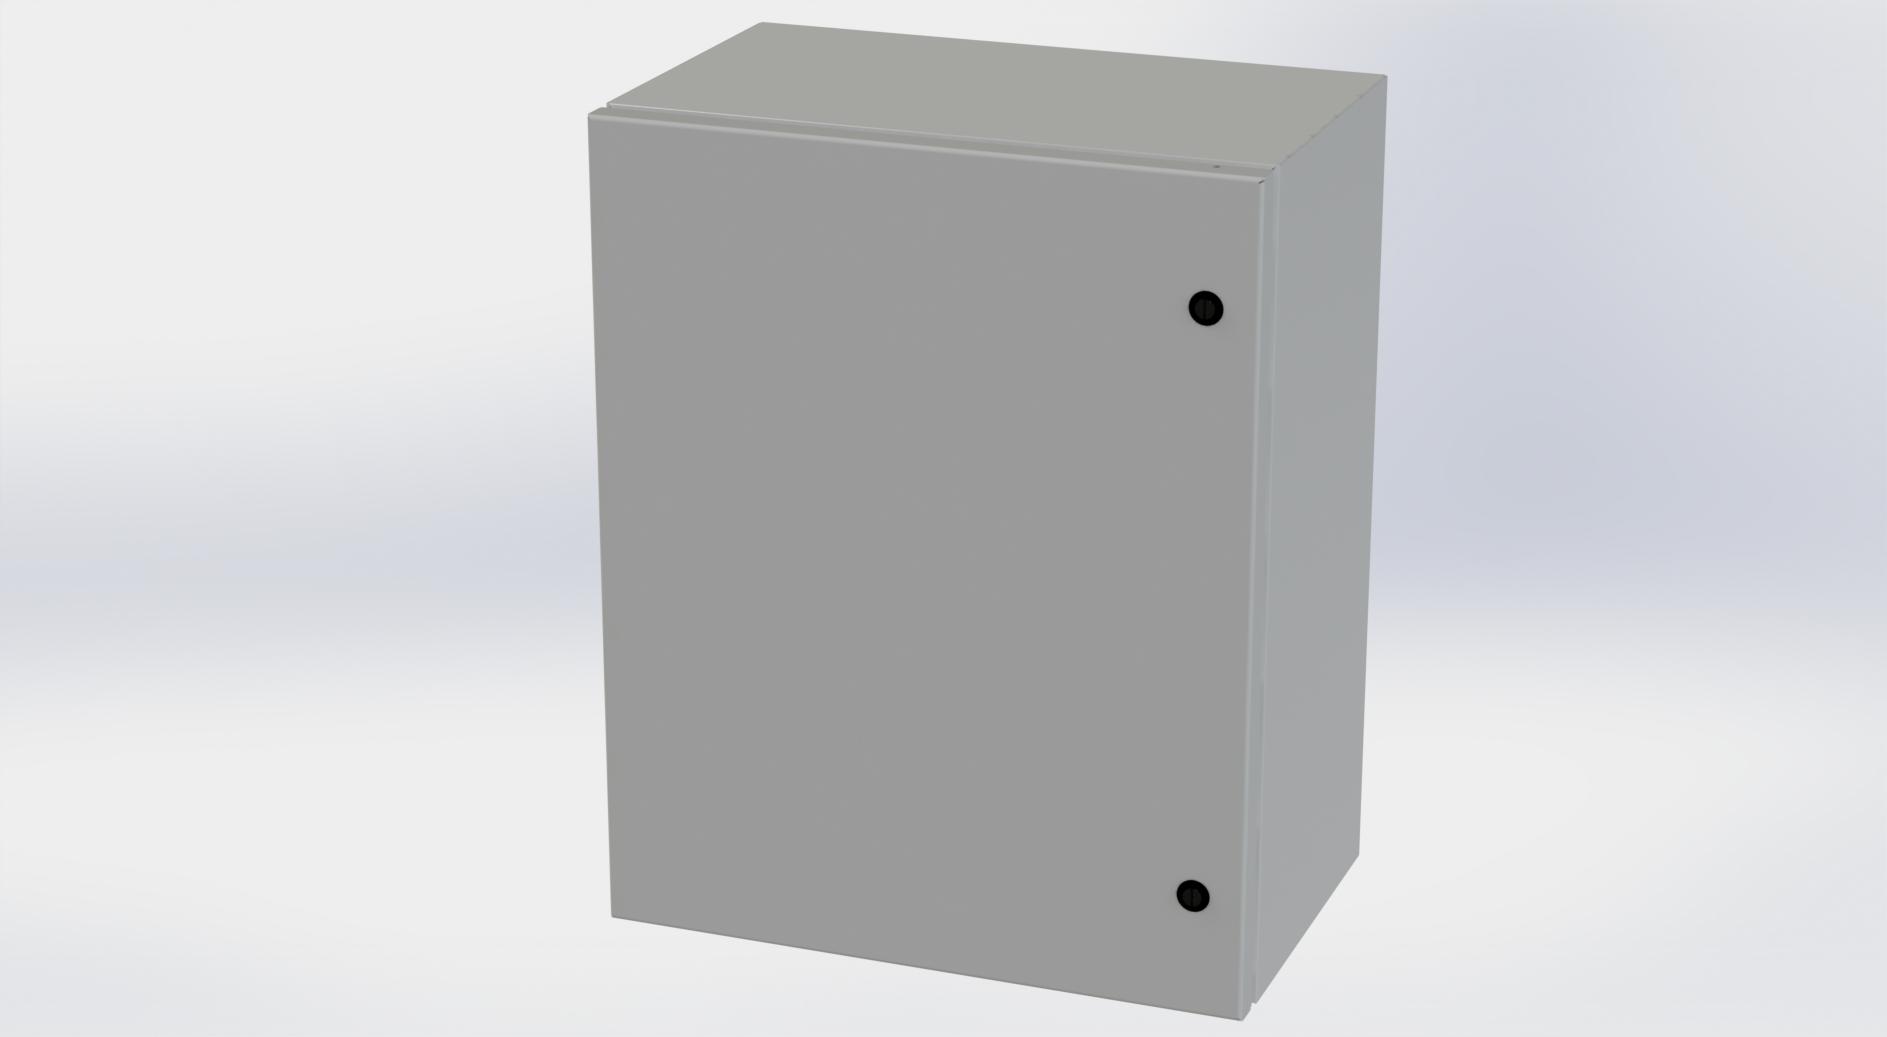 Saginaw Control SCE-201610ELJ ELJ Enclosure, Height:20.00", Width:16.00", Depth:10.00", ANSI-61 gray powder coating inside and out. Optional sub-panels are powder coated white.